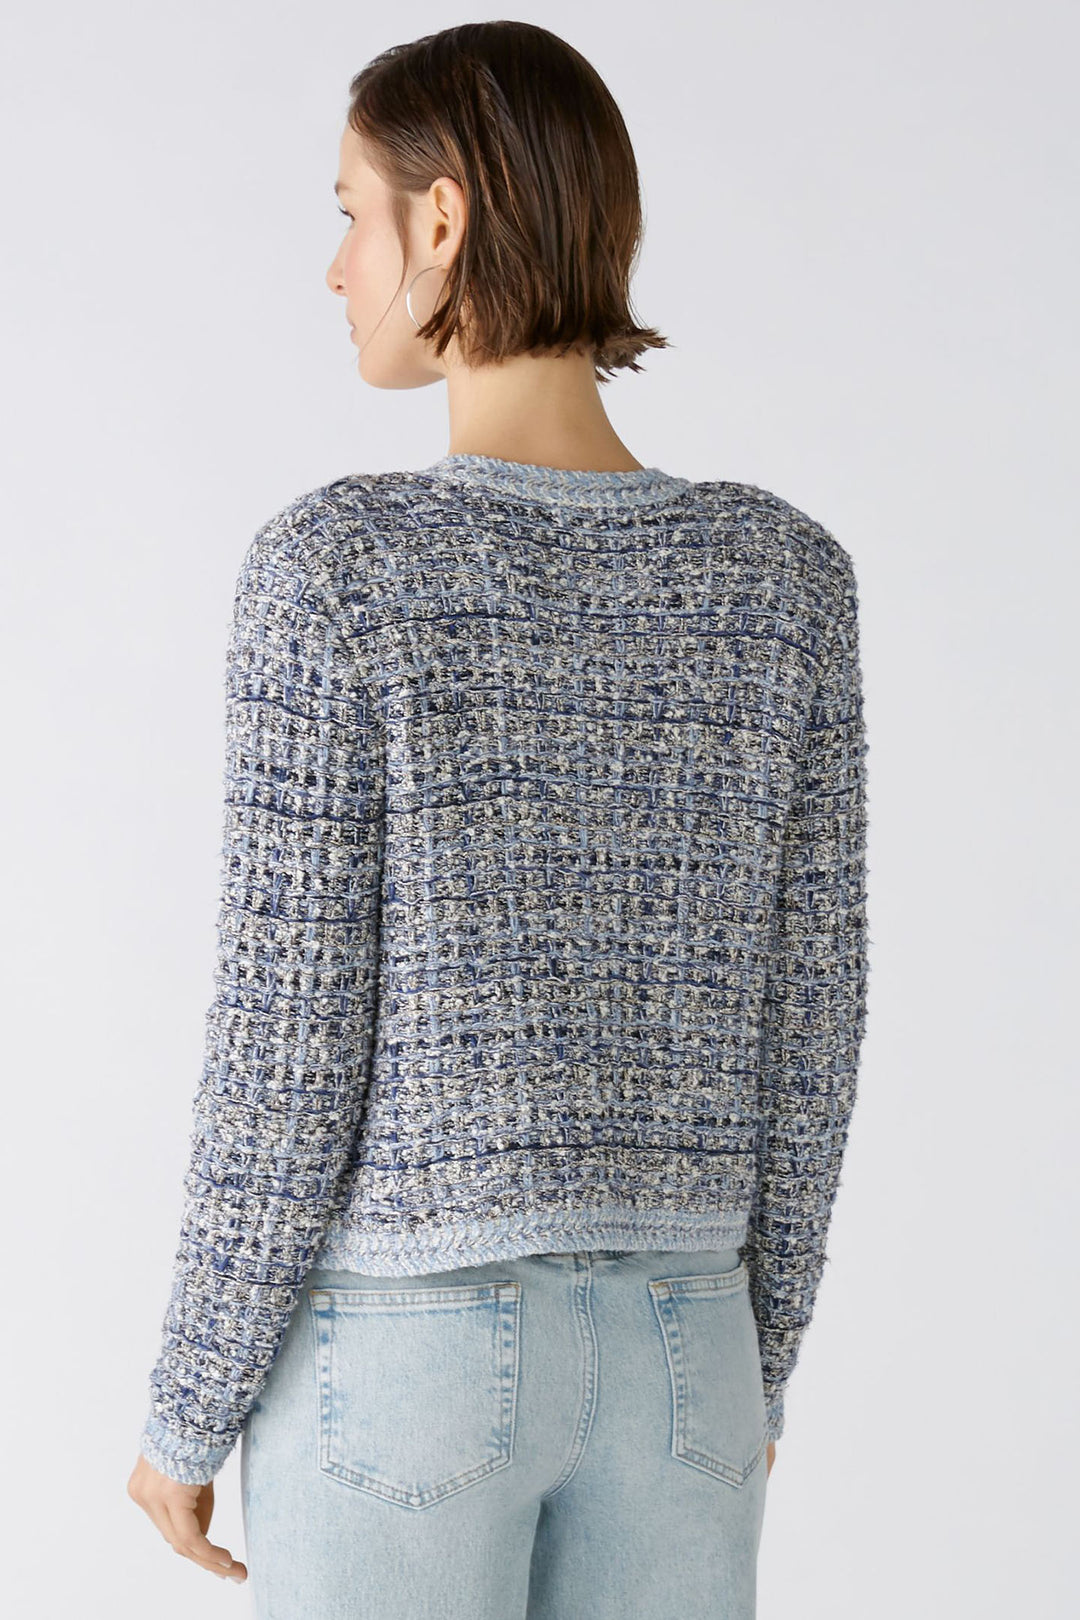 Oui 87825 Blue Chanel Inspired Knitted Cardigan - Olivia Grace Fashion